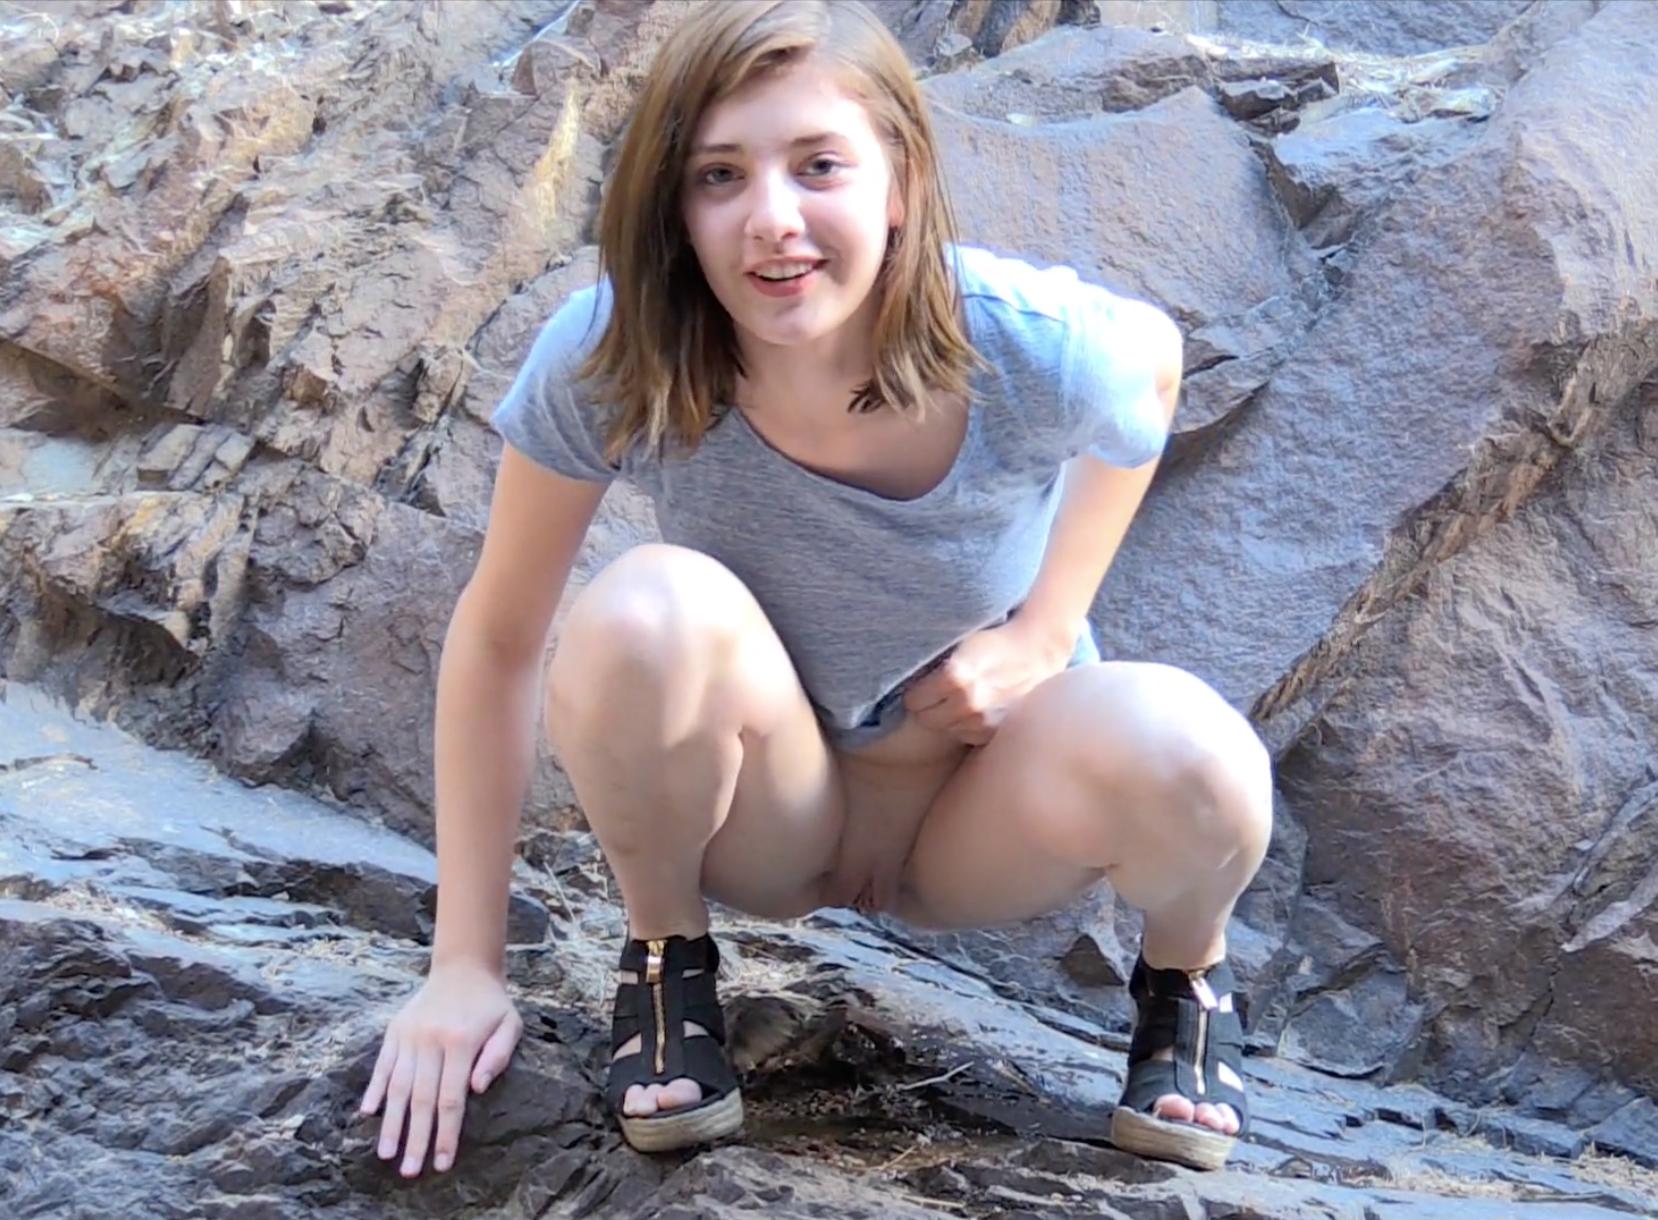 1658px x 1220px - Outdoor pee: Cute Teen Pees on Rocks - ThisVid.com